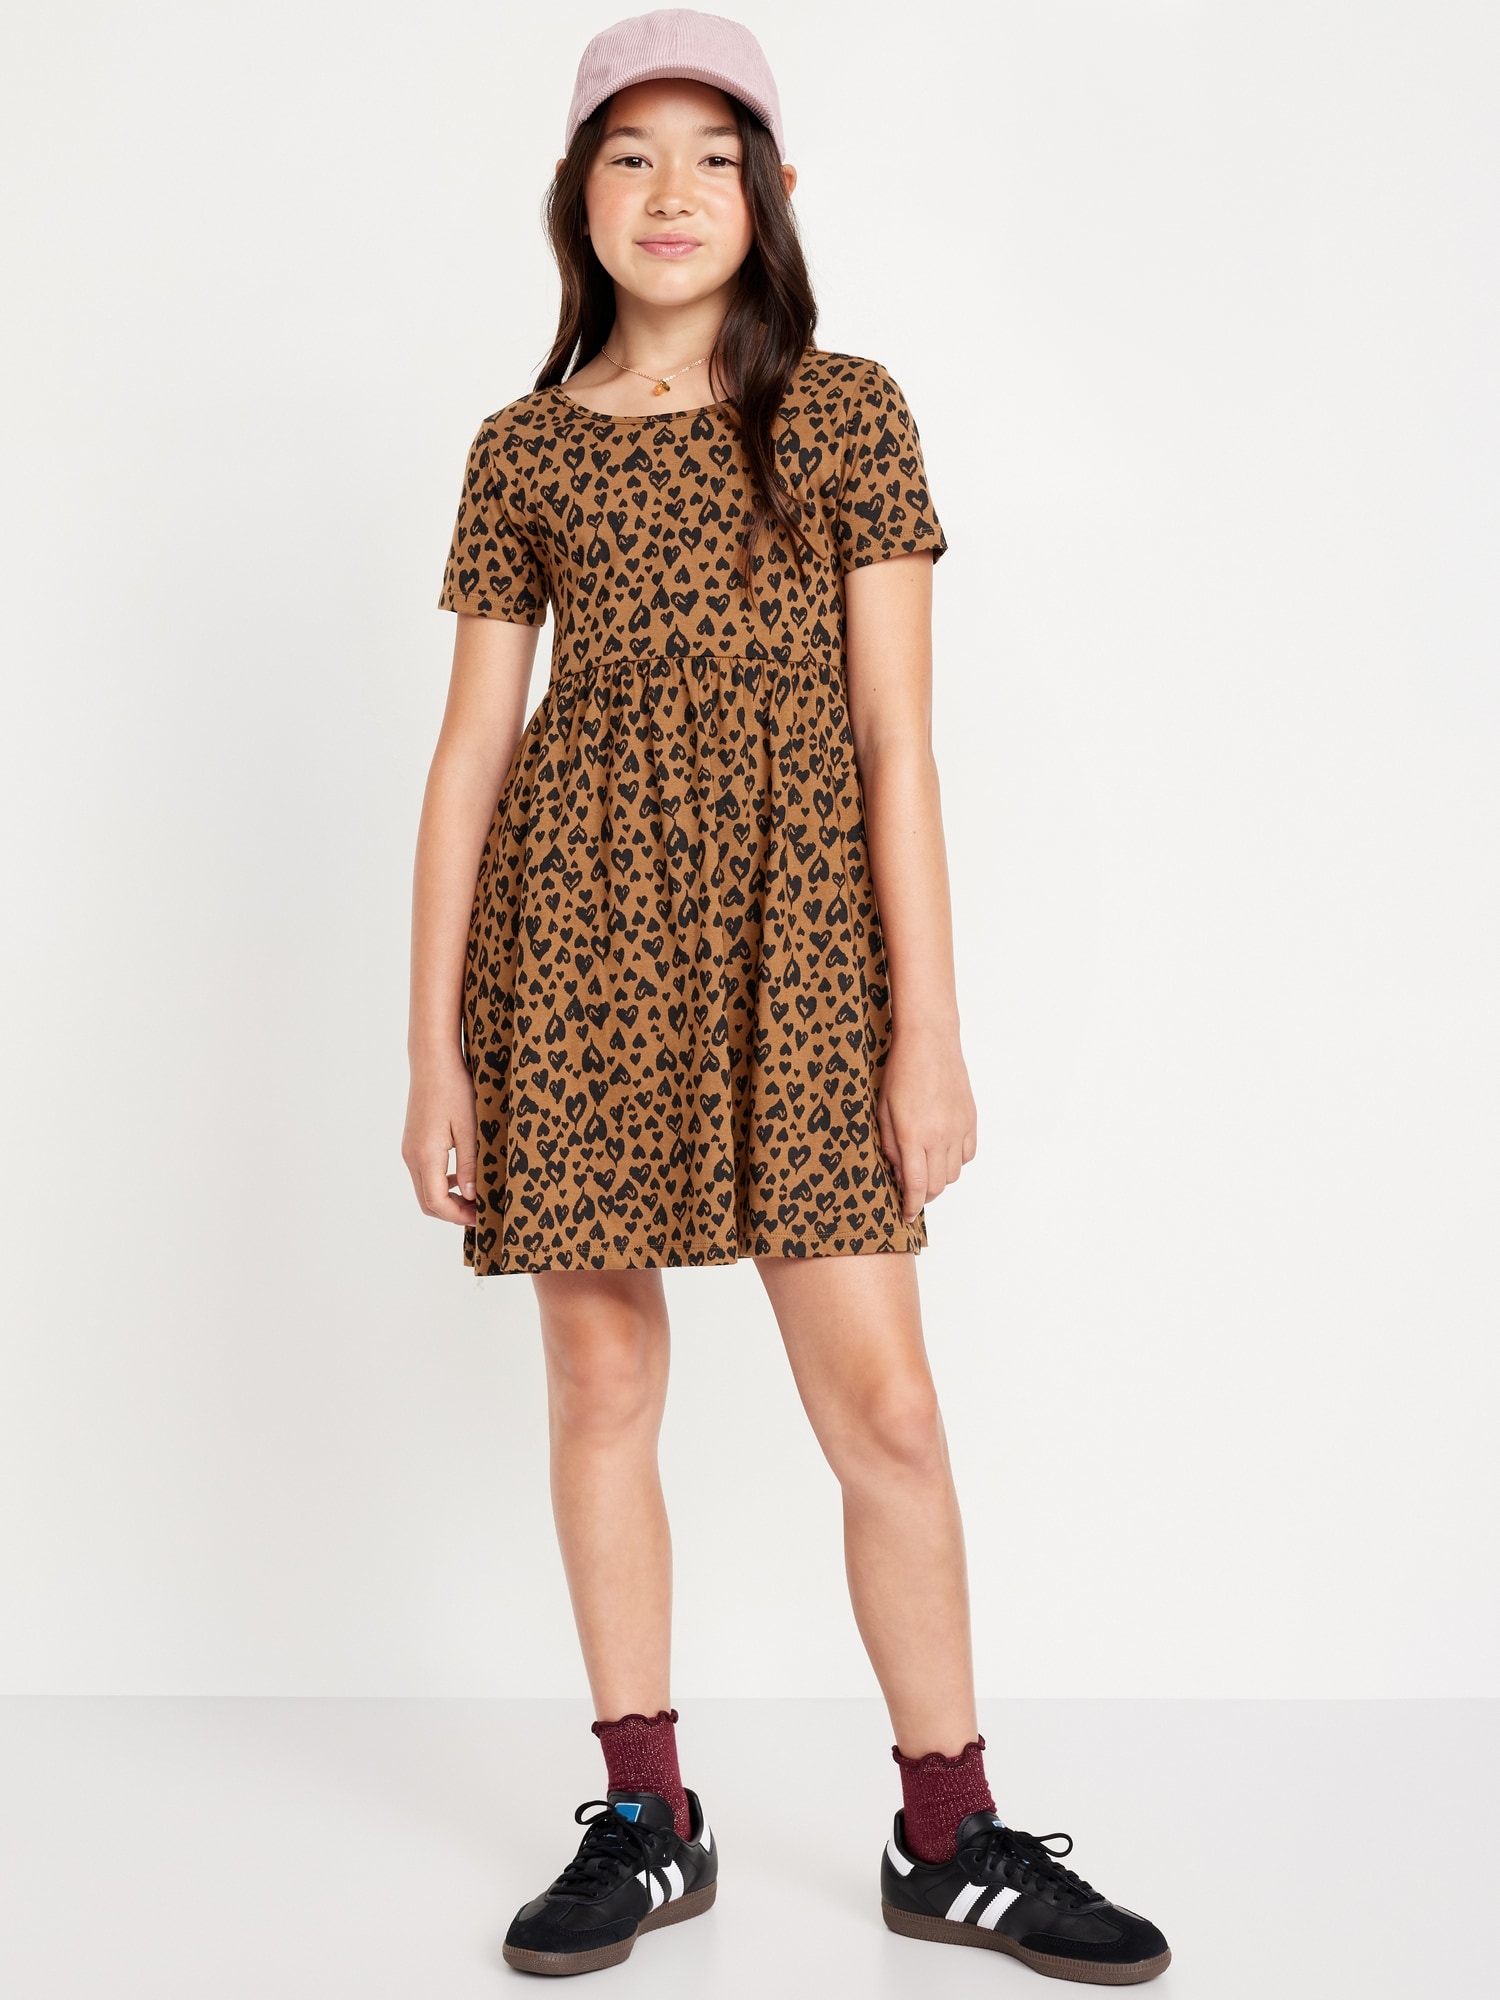 Printed Fit and Flare Dress for Girls